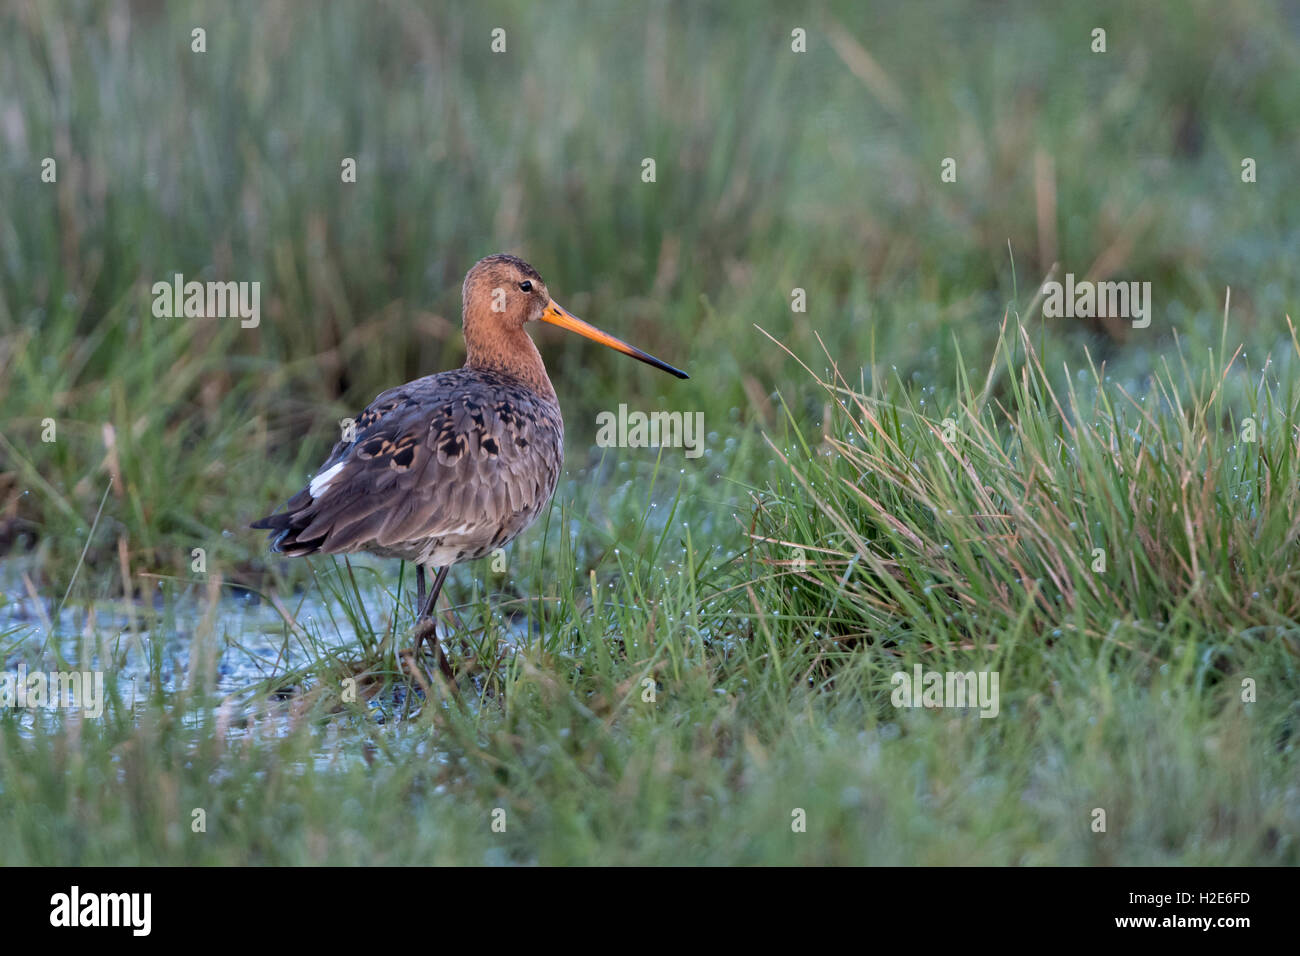 Black-tailed godwit (Limosa limosa) in wetland, Dümmer Lake, Diepholz district, Lower Saxony, Germany Stock Photo